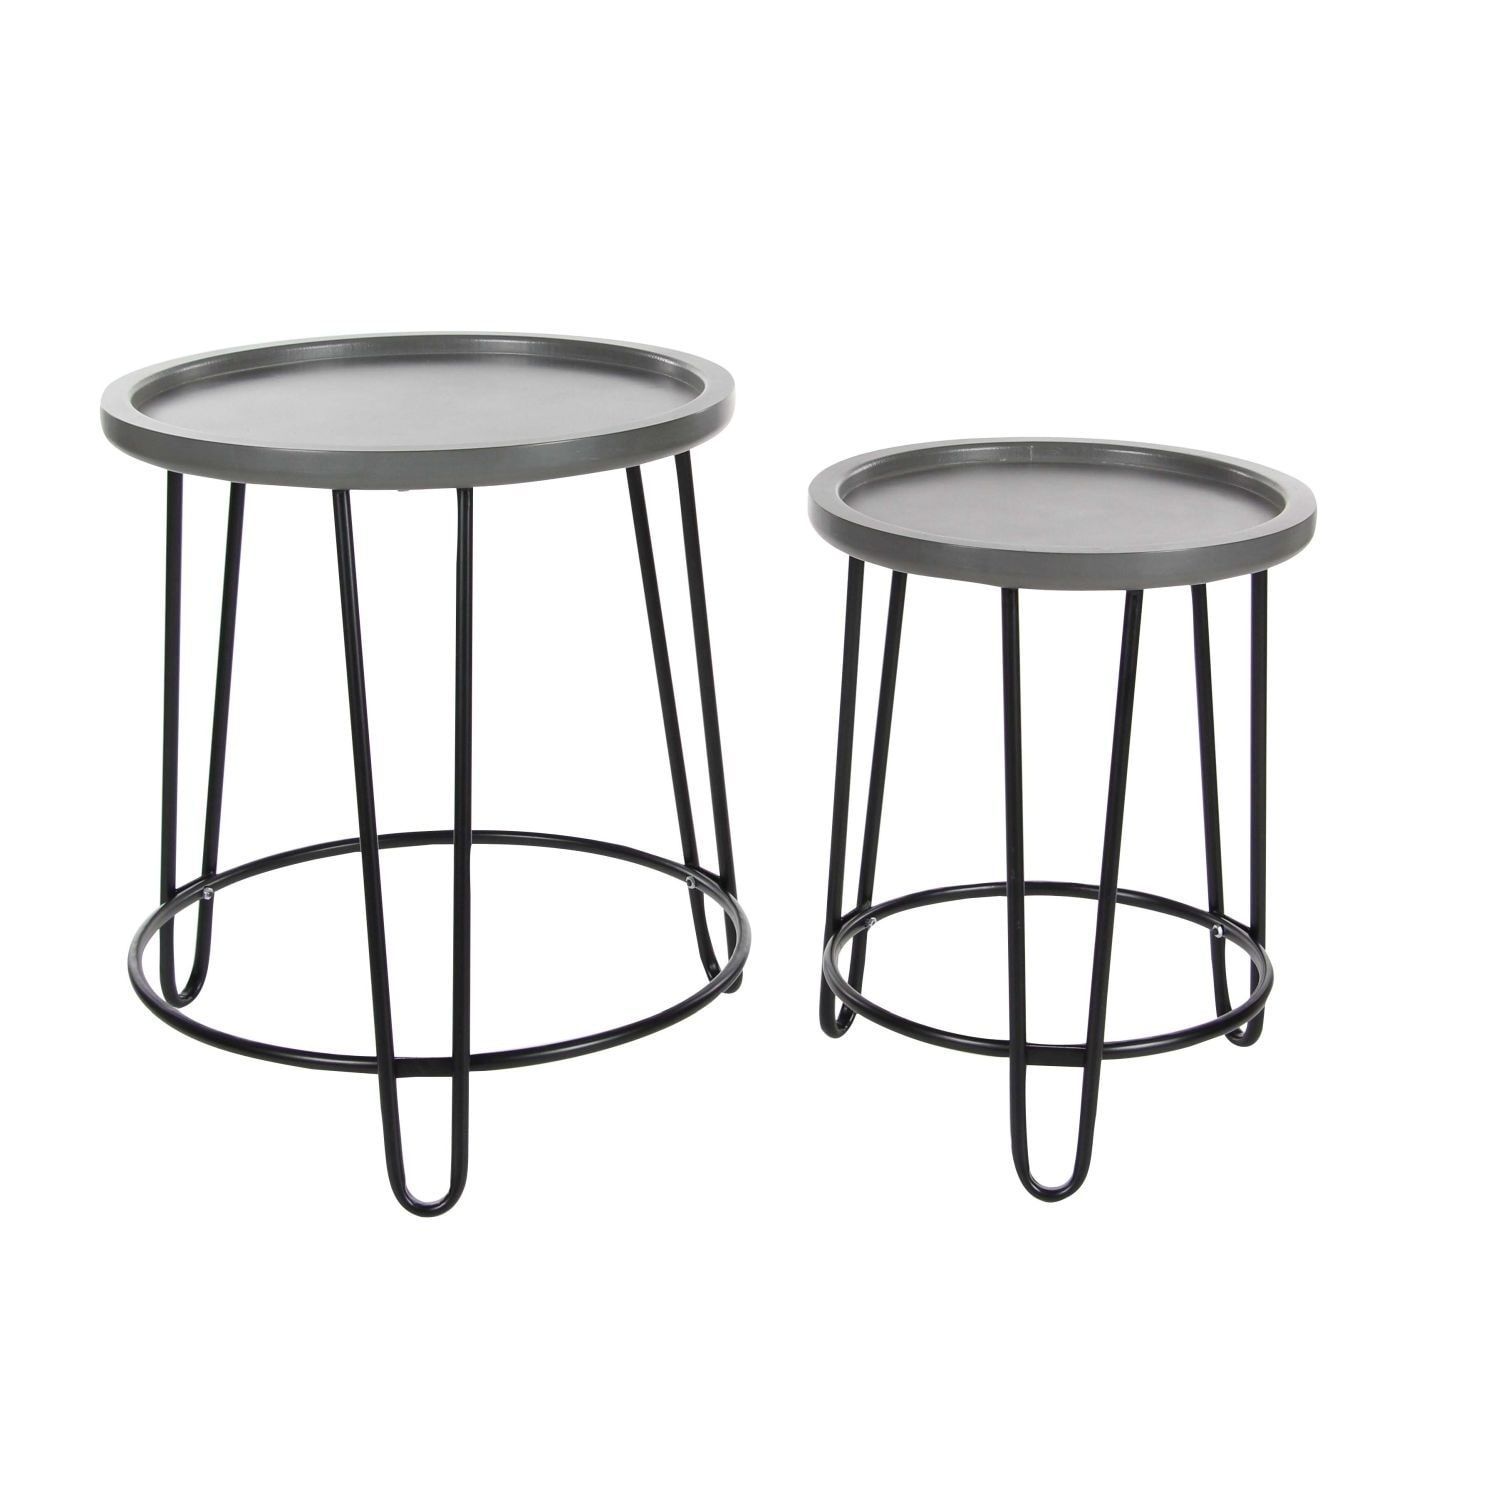 table metal chairs furniture wood kitchen outdoor set bistro iron base round white and retro accent wrought bar patio corranade dining garden chair top sets glass drum full size